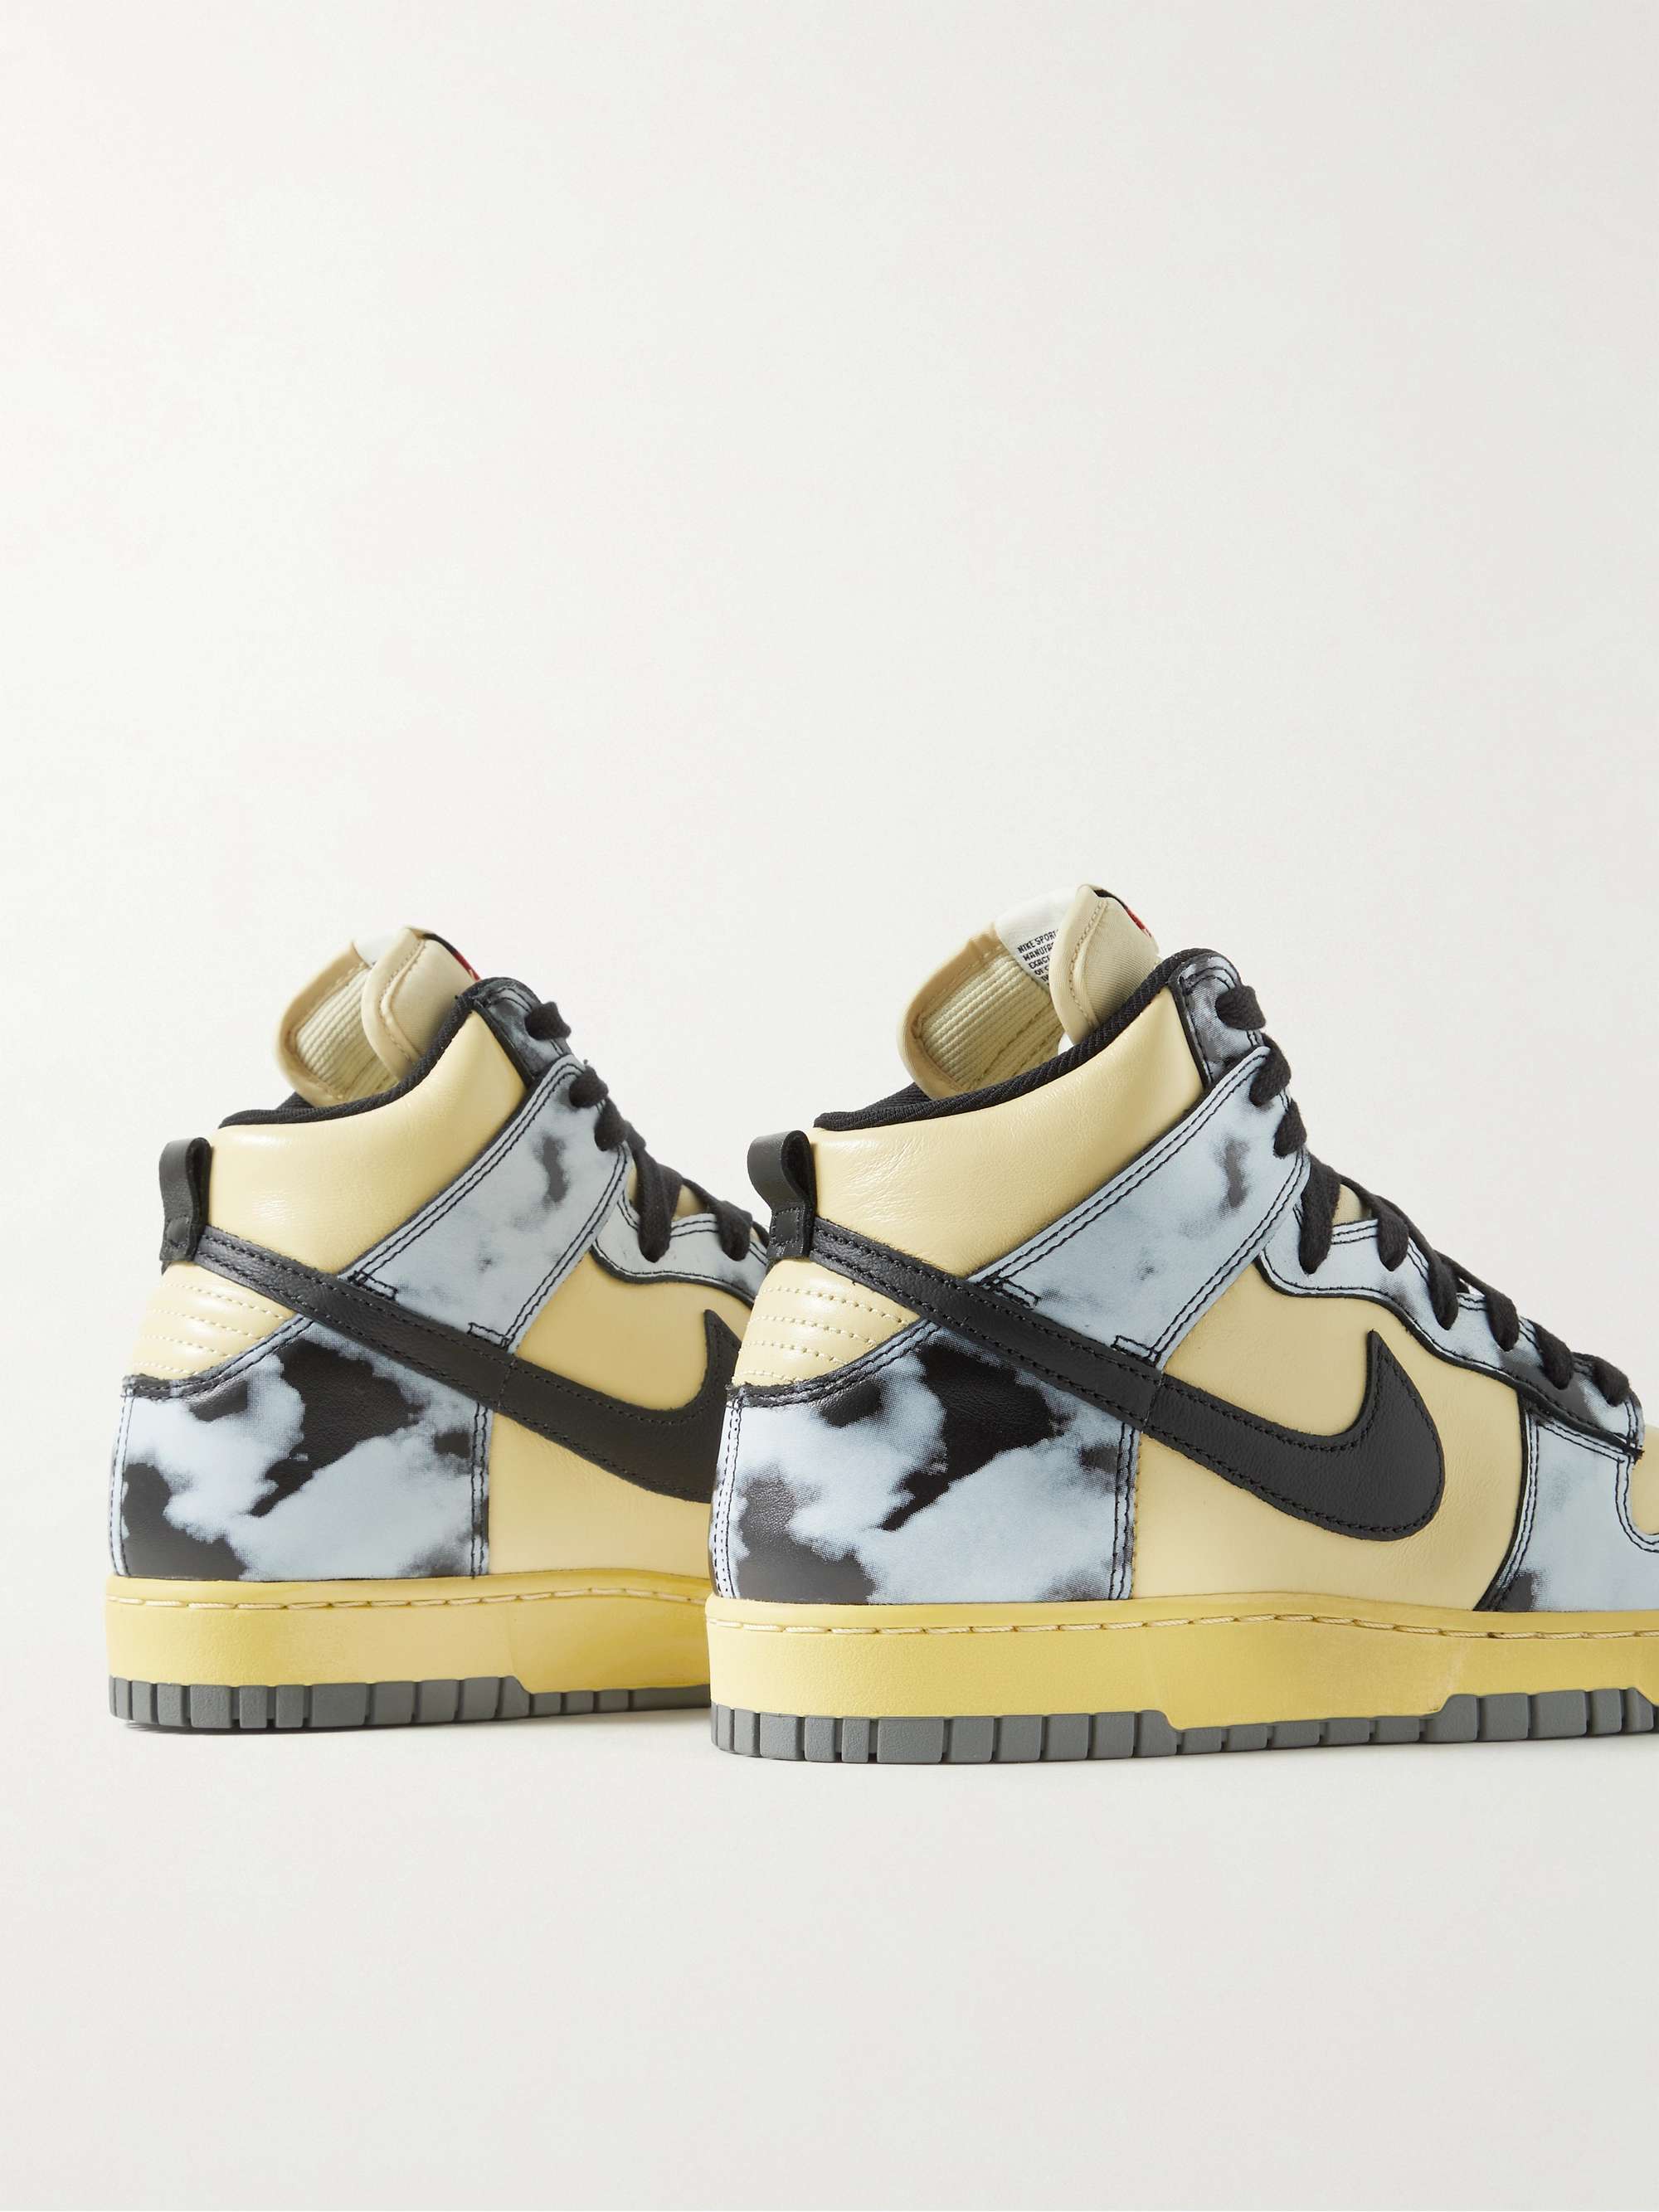 NIKE Dunk High 1985 Printed Leather High-Top Sneakers